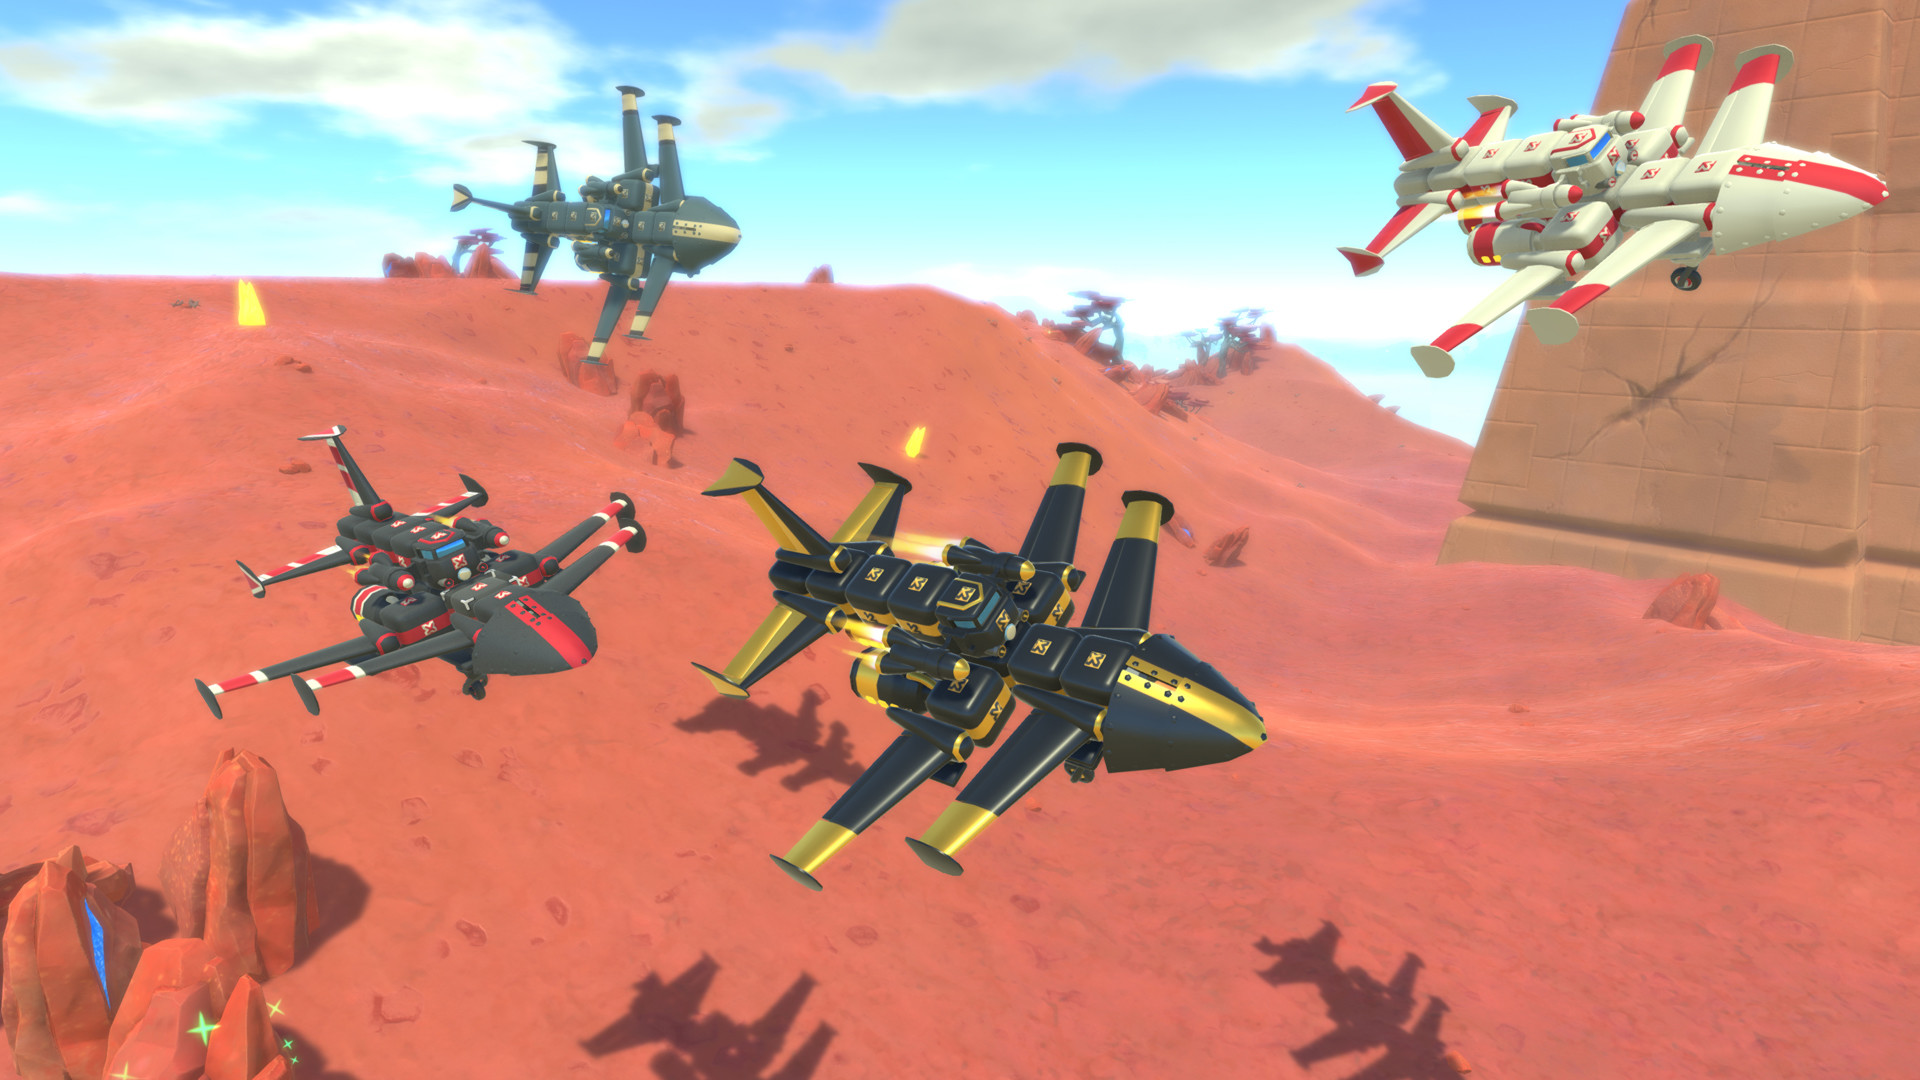 download the last version for mac TerraTech